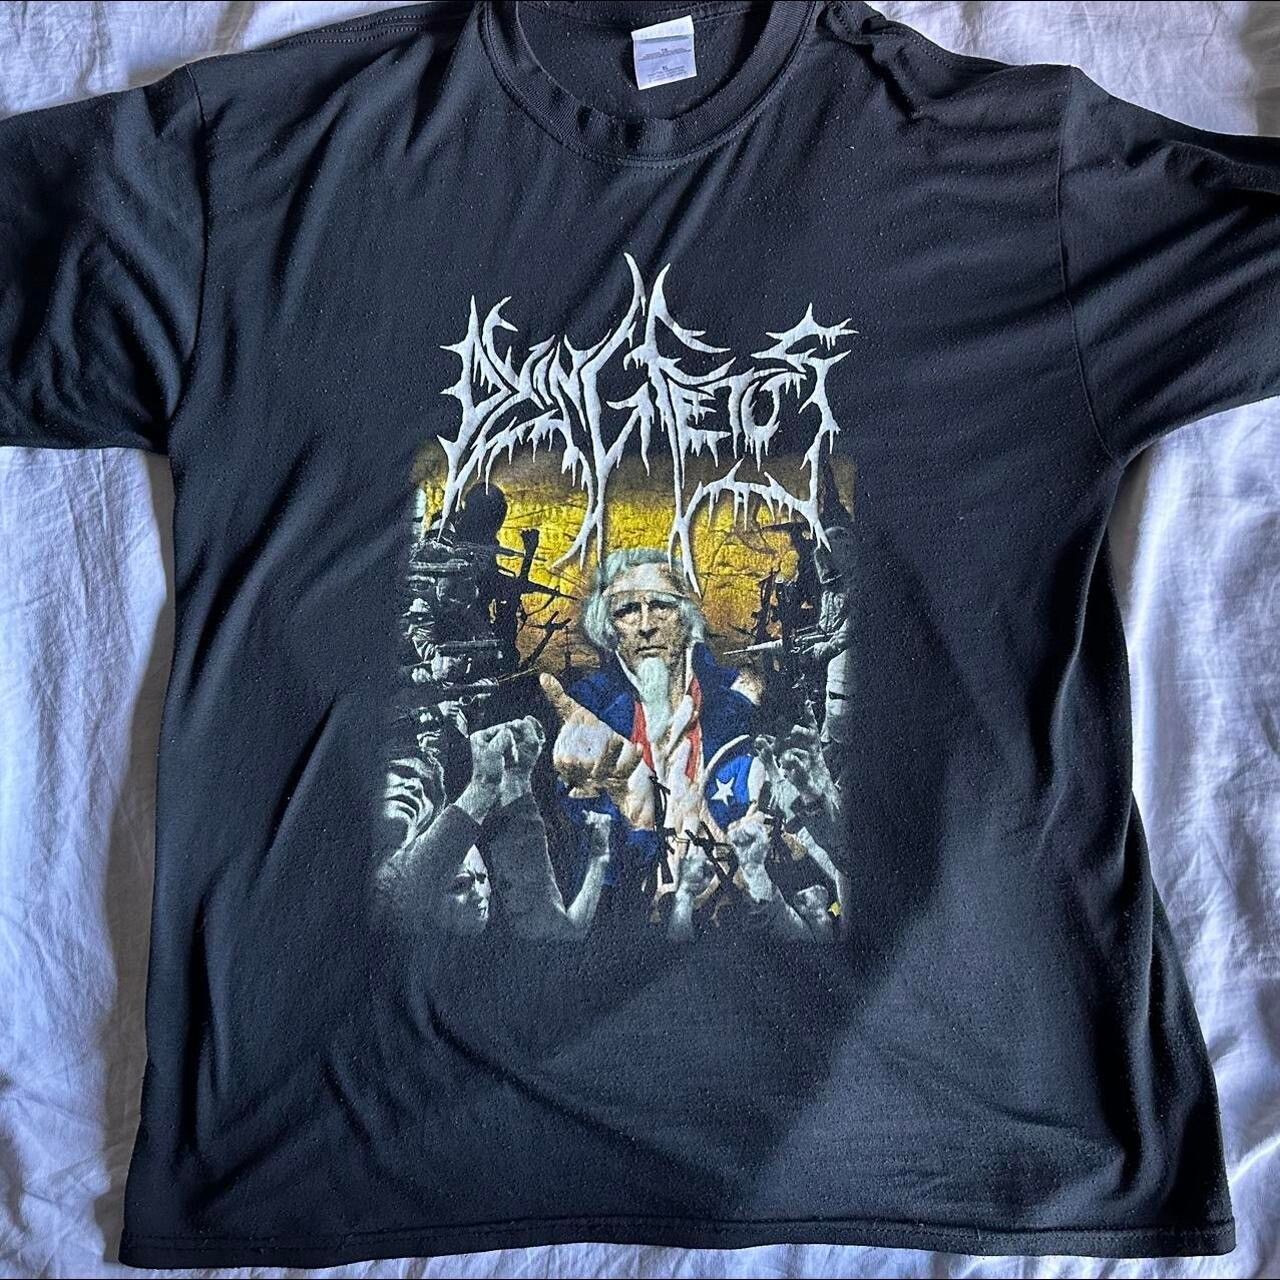 Streetwear Dying Fetus “Destroy The Opposition” Vintage Band Tee, XL Size US XL / EU 56 / 4 - 1 Preview